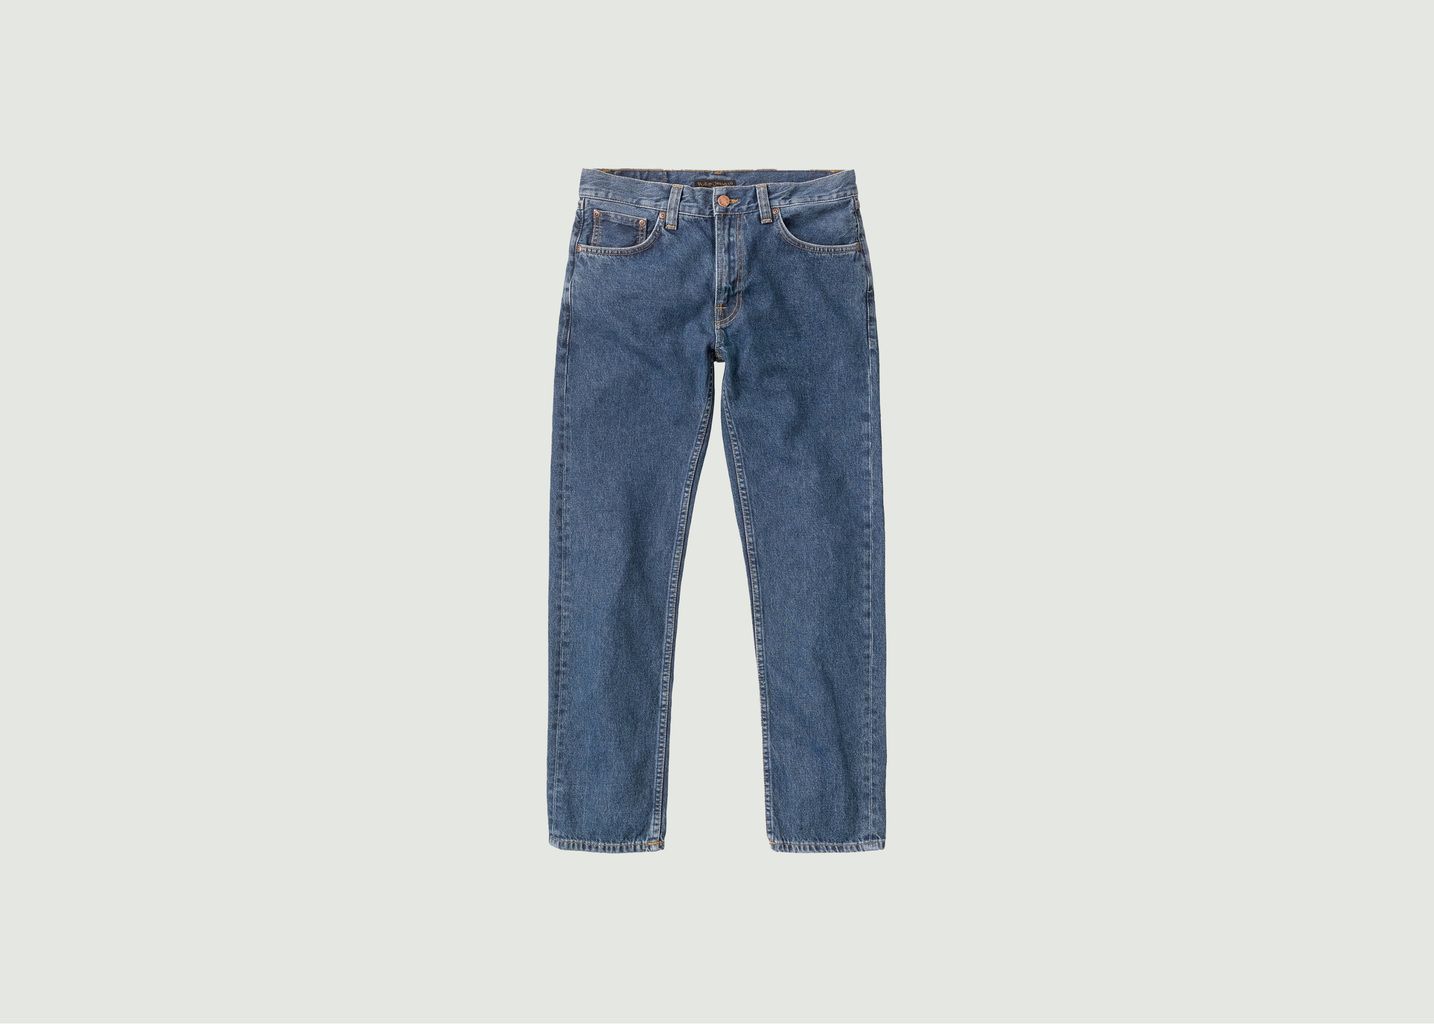 Gritty Jackson 90s jeans - Nudie Jeans